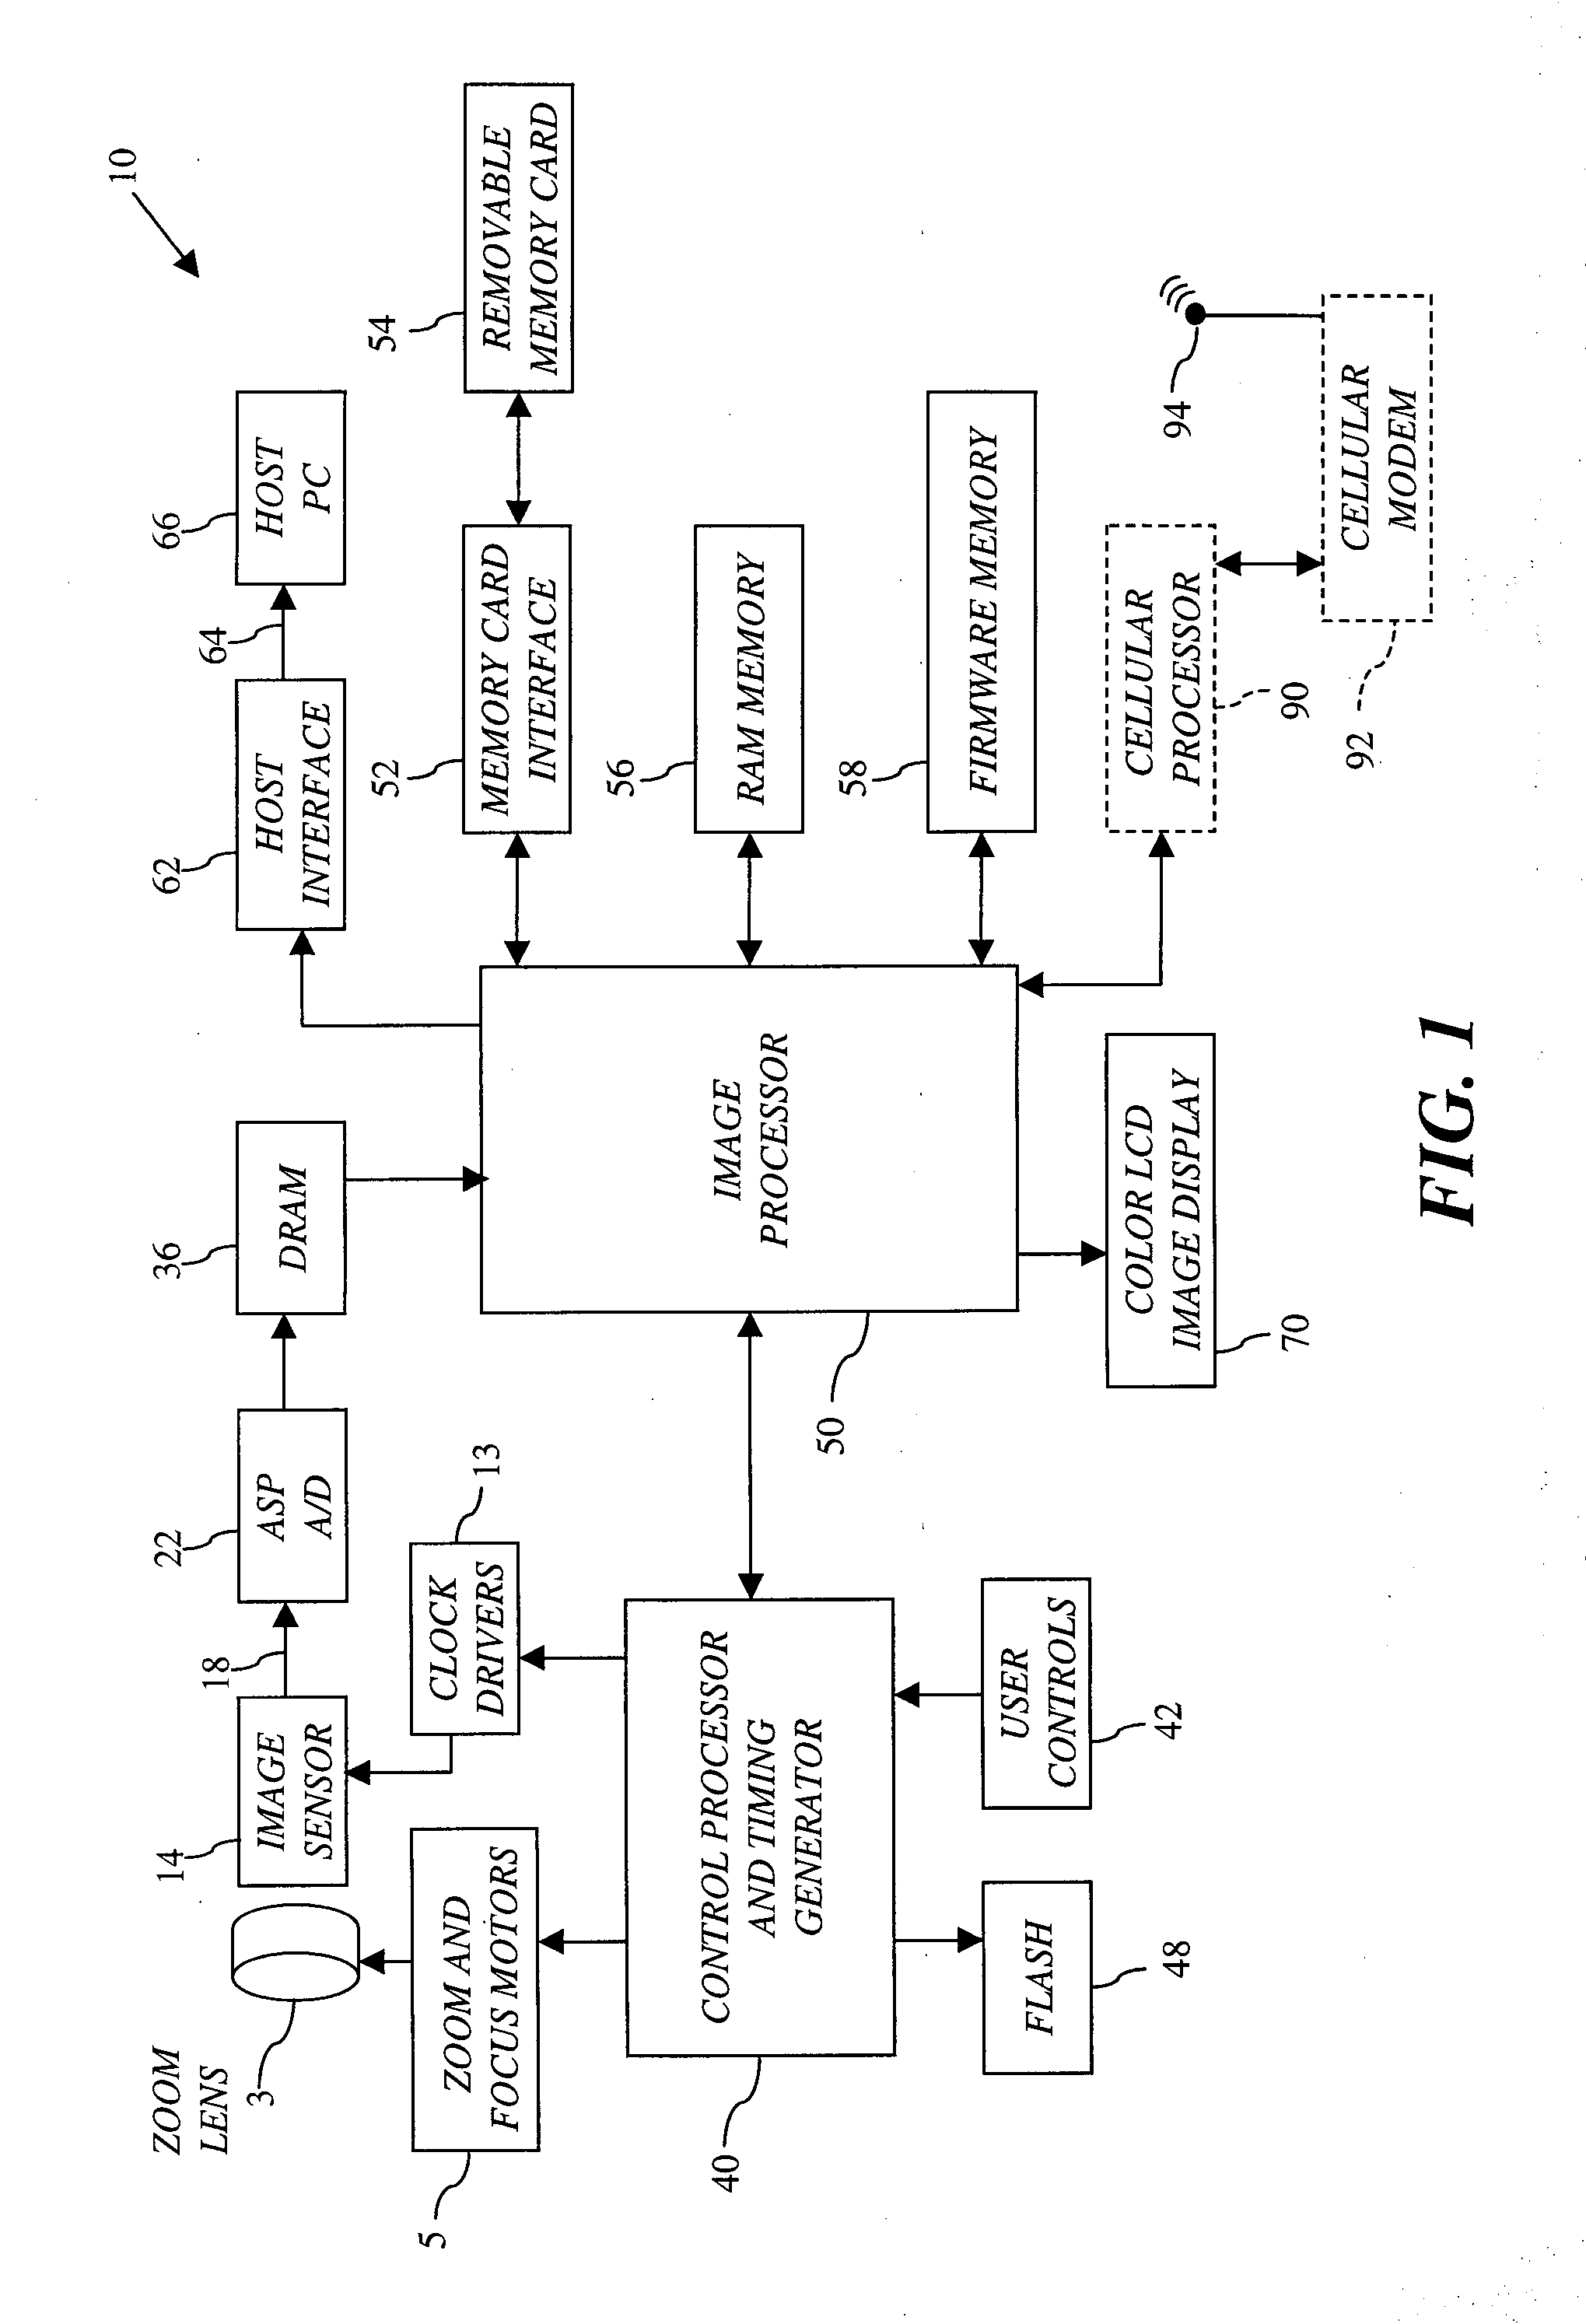 Determining and correcting for imaging device motion during an exposure